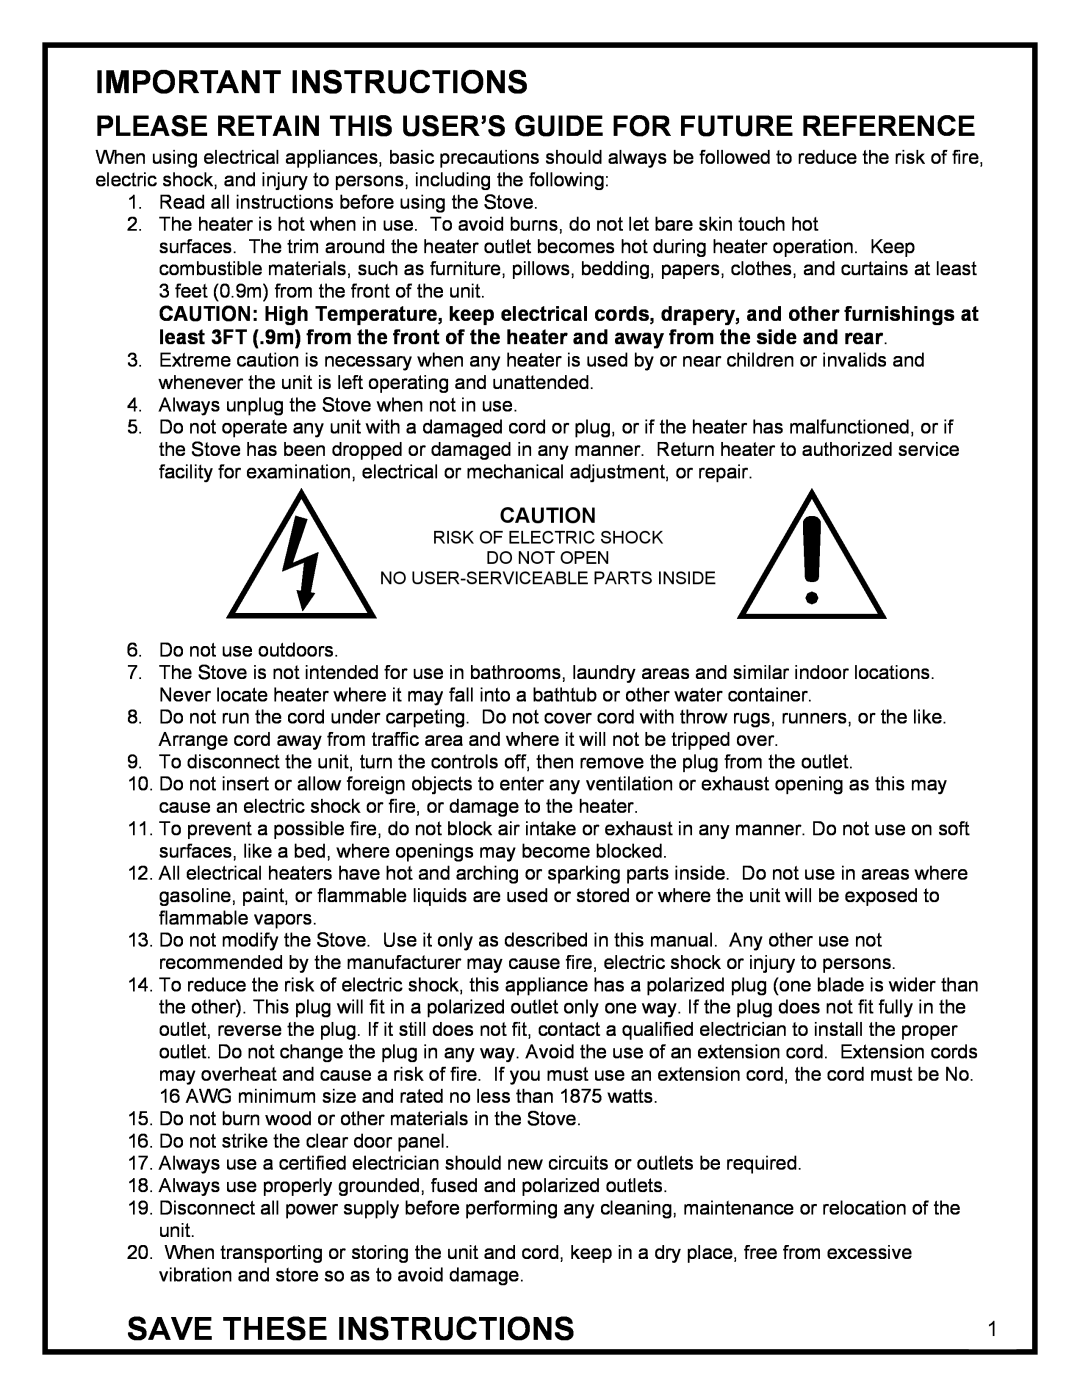 Dimplex ELECTRIC STOVE manual Important Instructions, Save These Instructions 